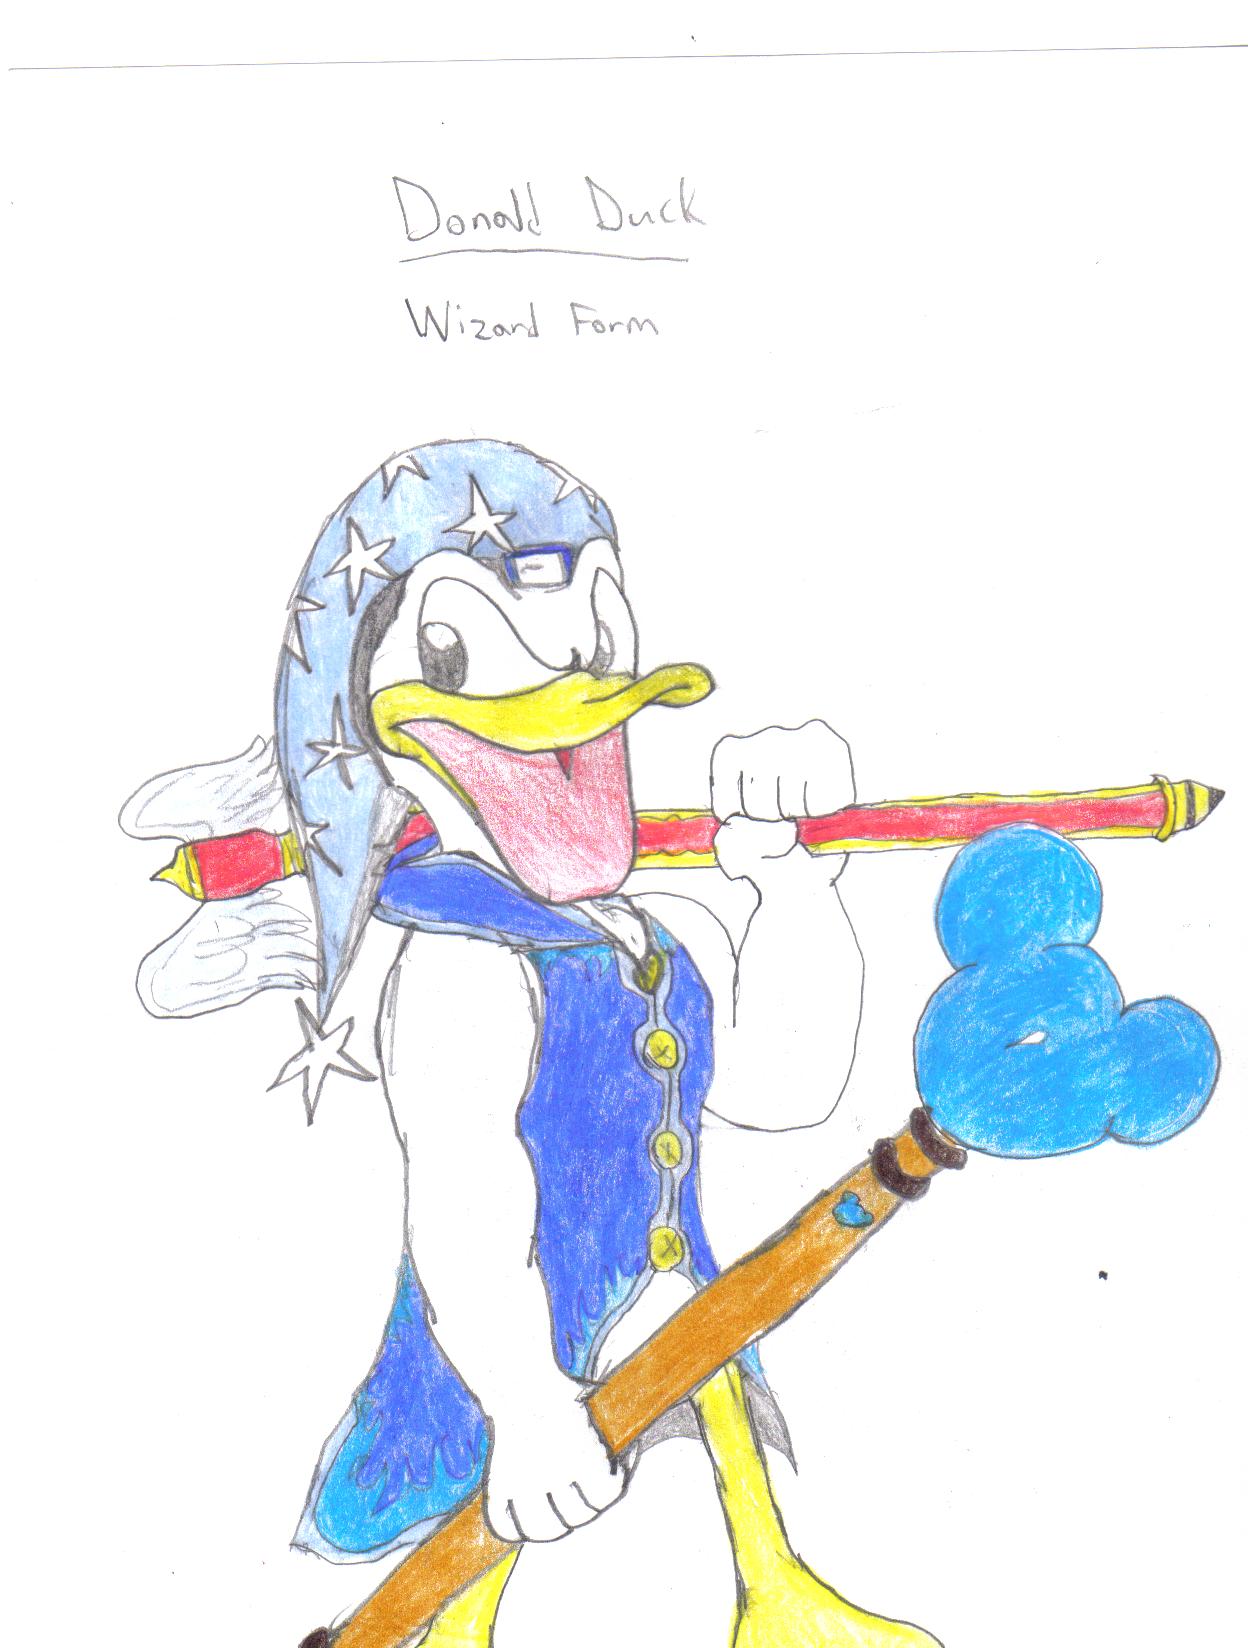 Donald Duck: Wizard Form by Playa135